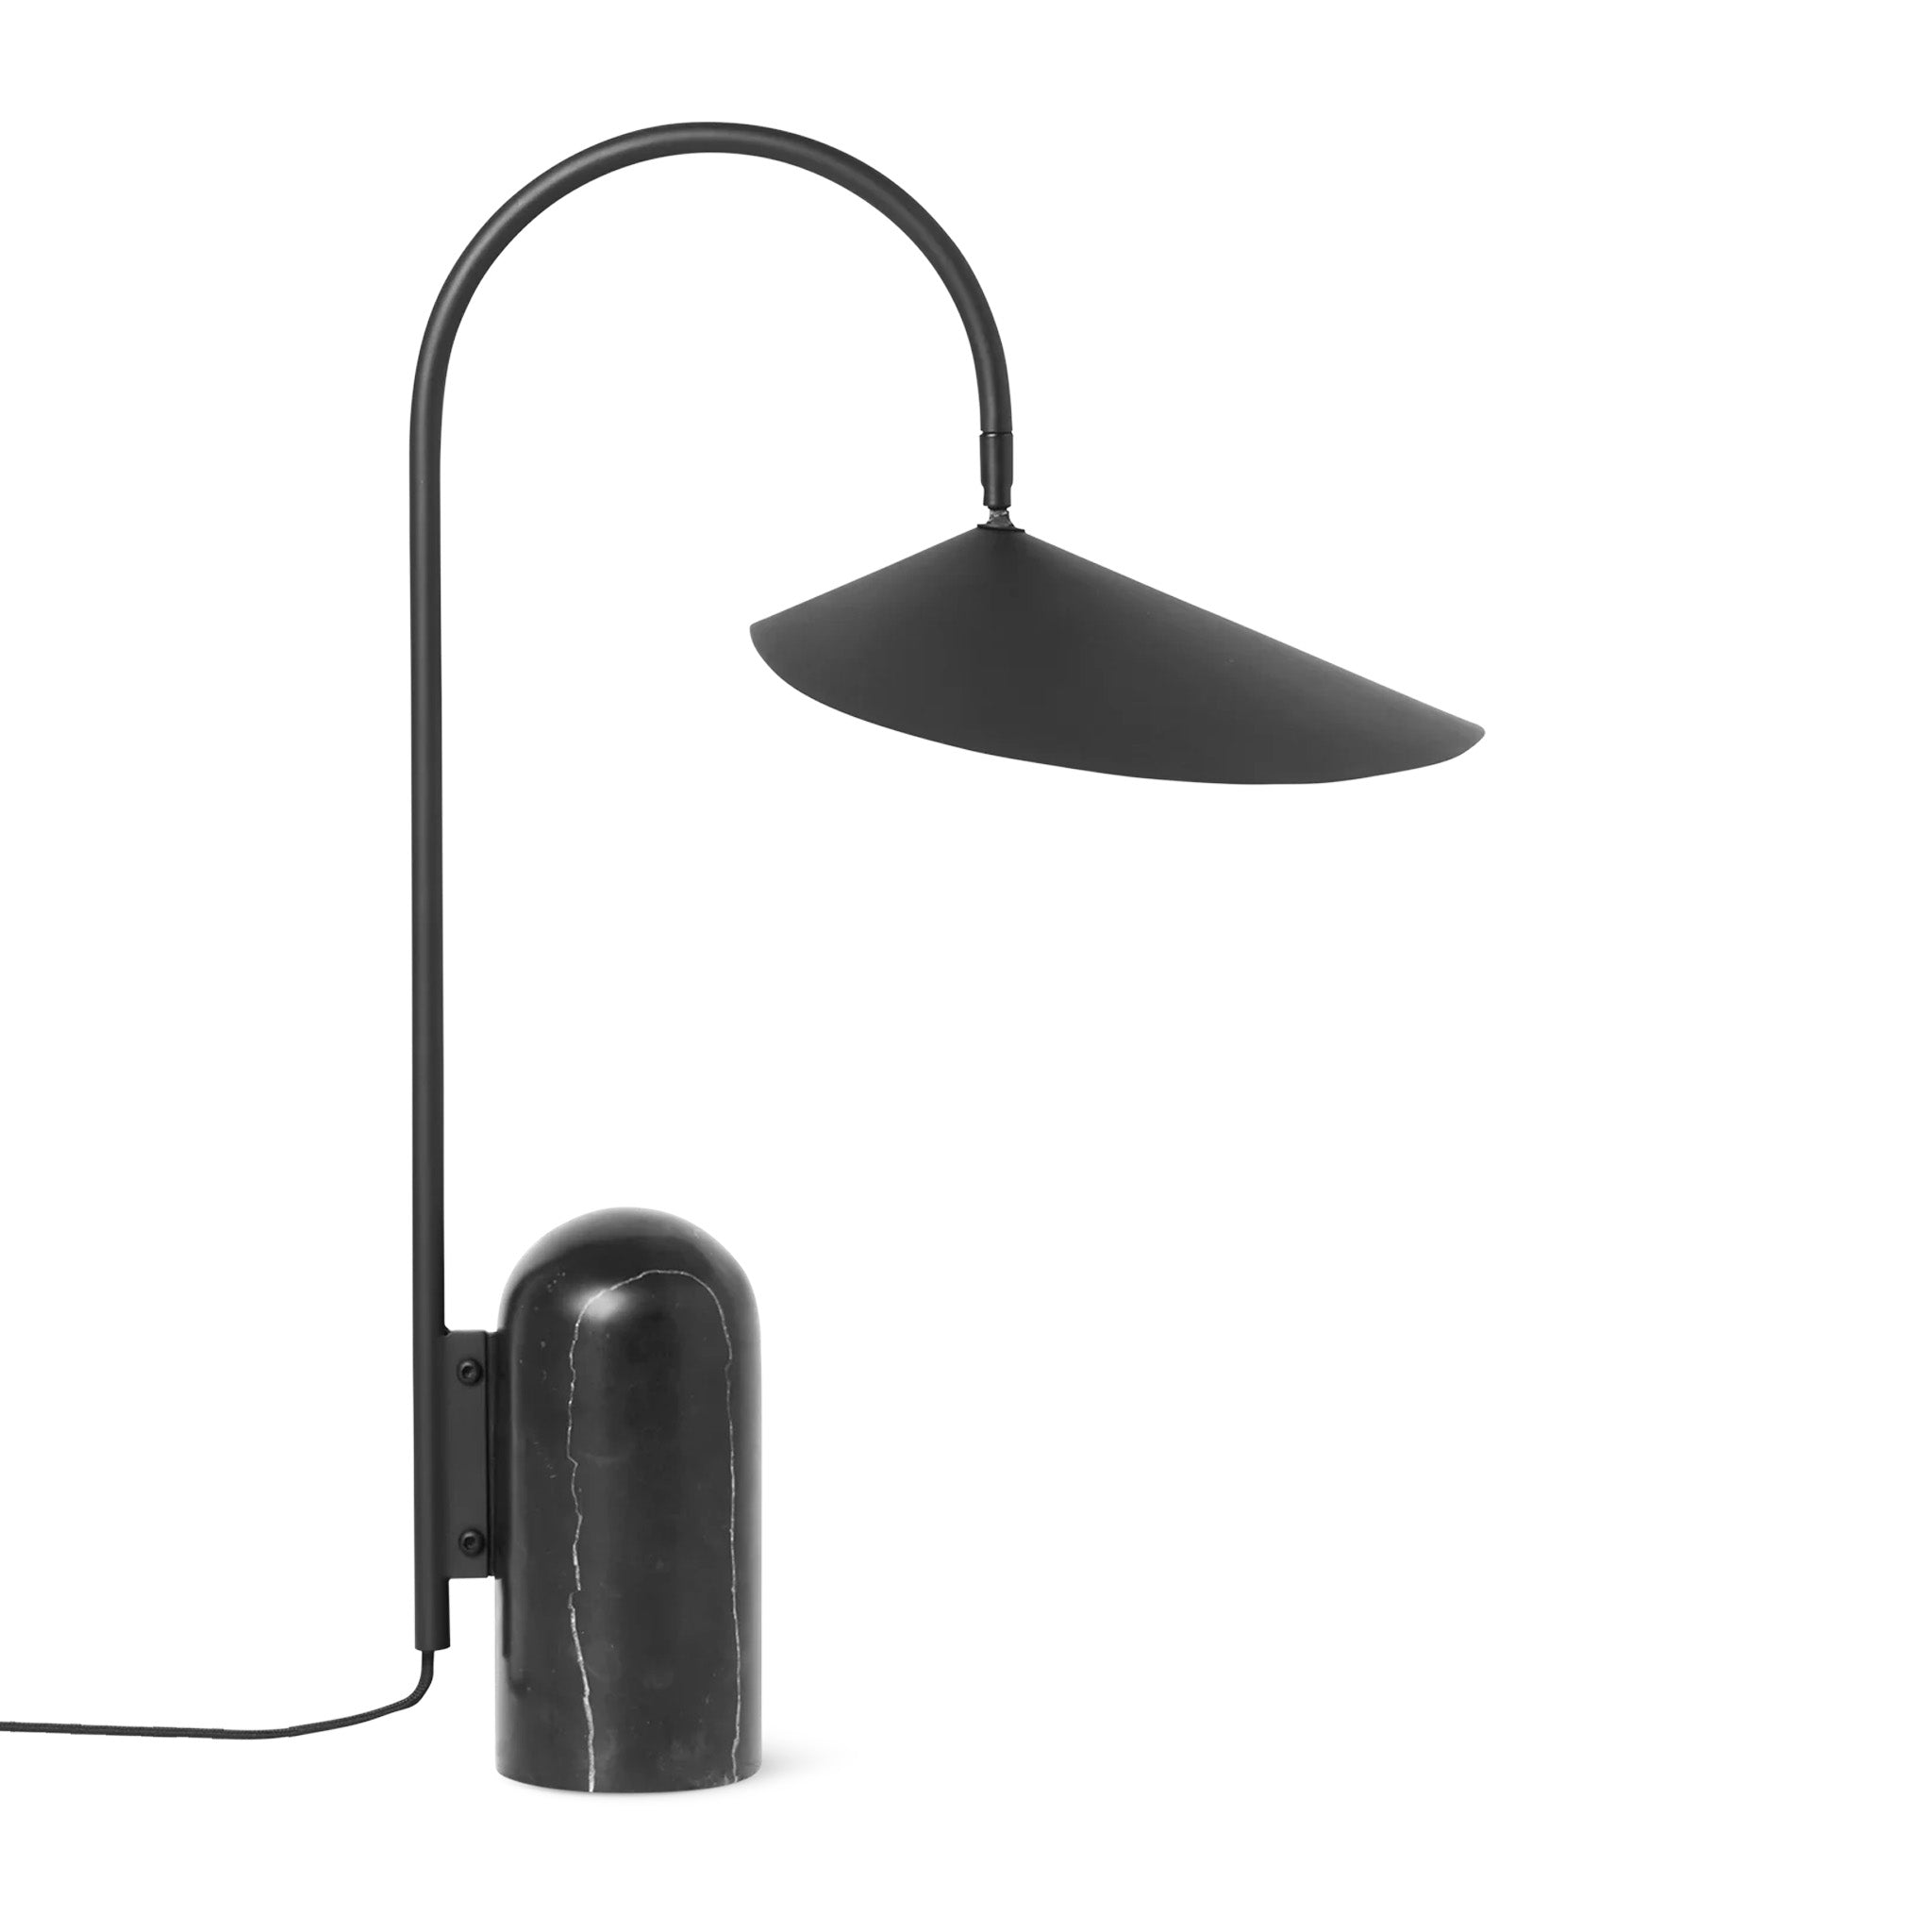 Arum Table Lamp by Ferm Living